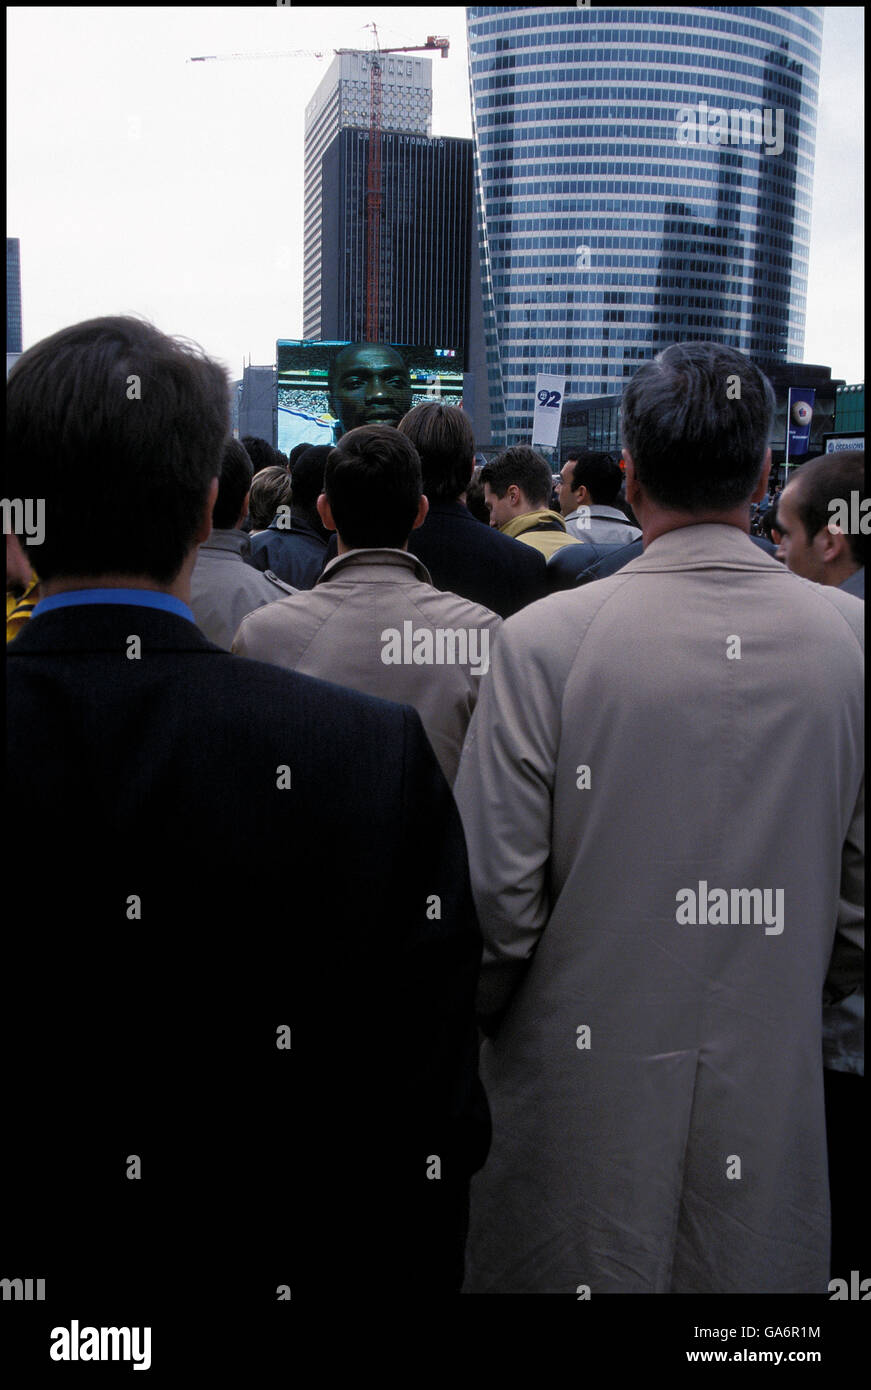 Men in raincoats watch France soccer team play in World Cup on giant screen at La Défense, France, June 2002 Stock Photo